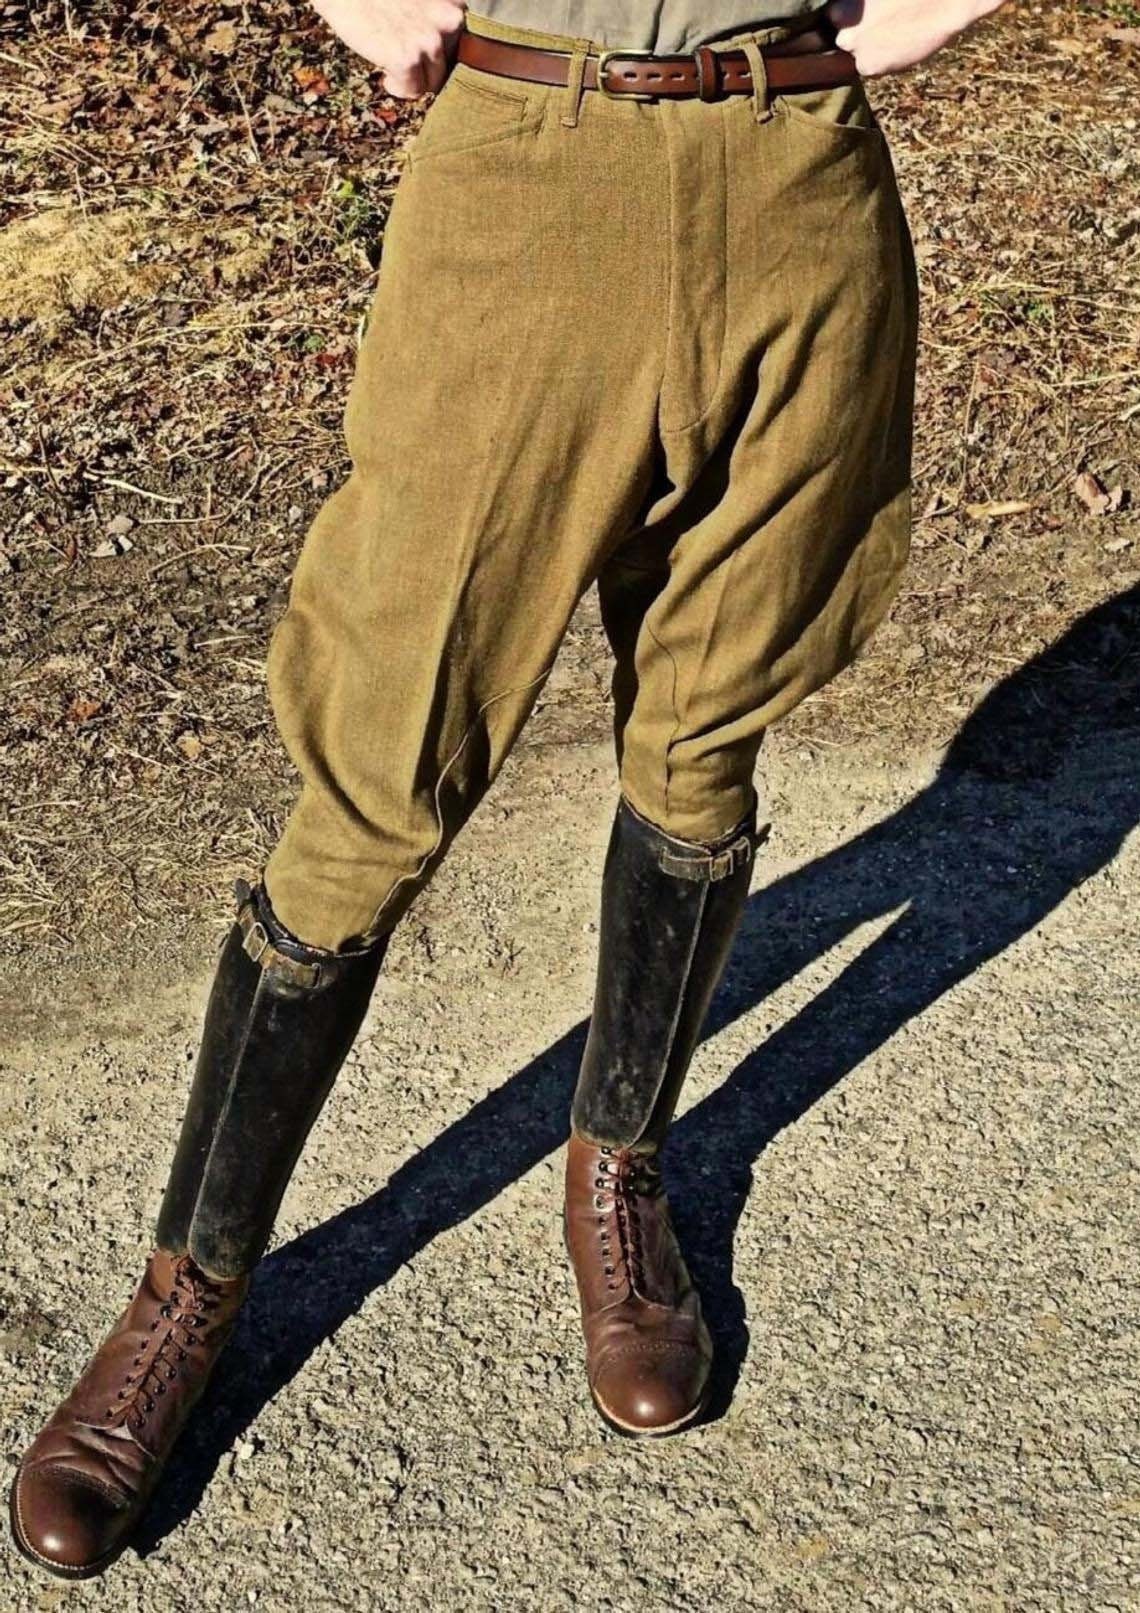 Jodhpurs Vs. Breeches, What's the Difference? | Breeches.com